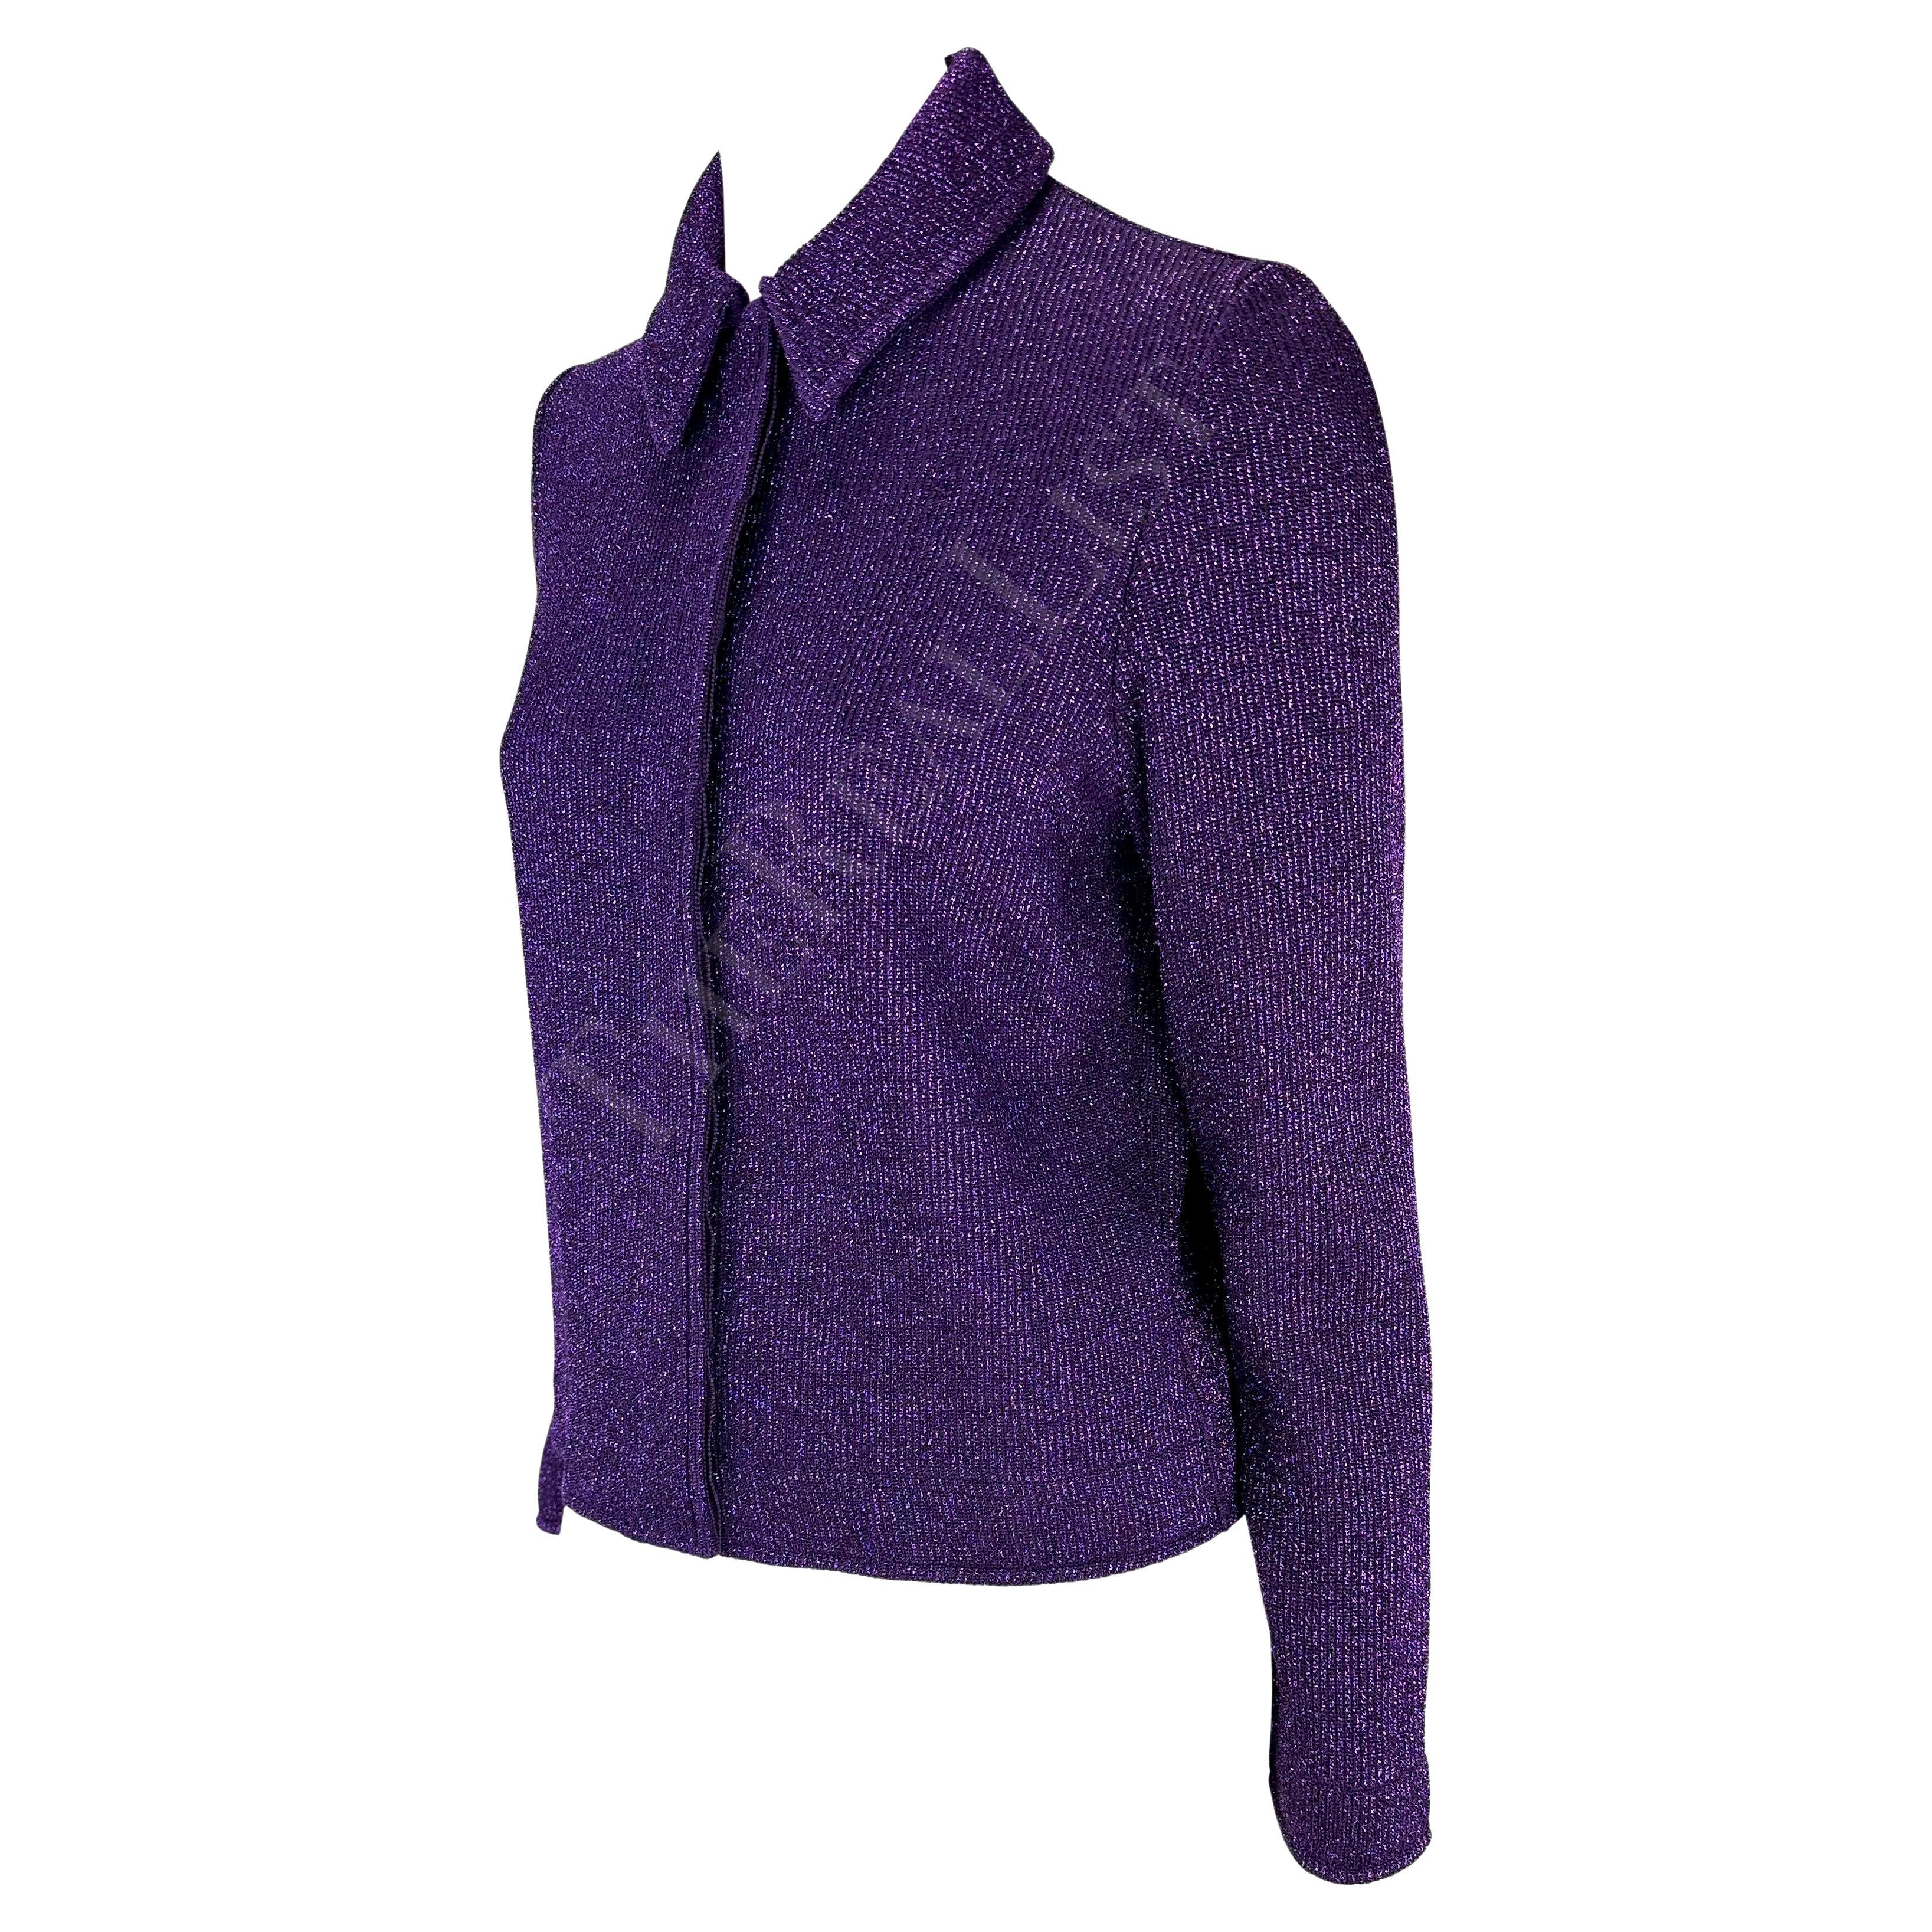 F/W 1996 Salvatore Ferragamo Runway Purple Metallic Knit Sweater Jacket In Excellent Condition For Sale In West Hollywood, CA